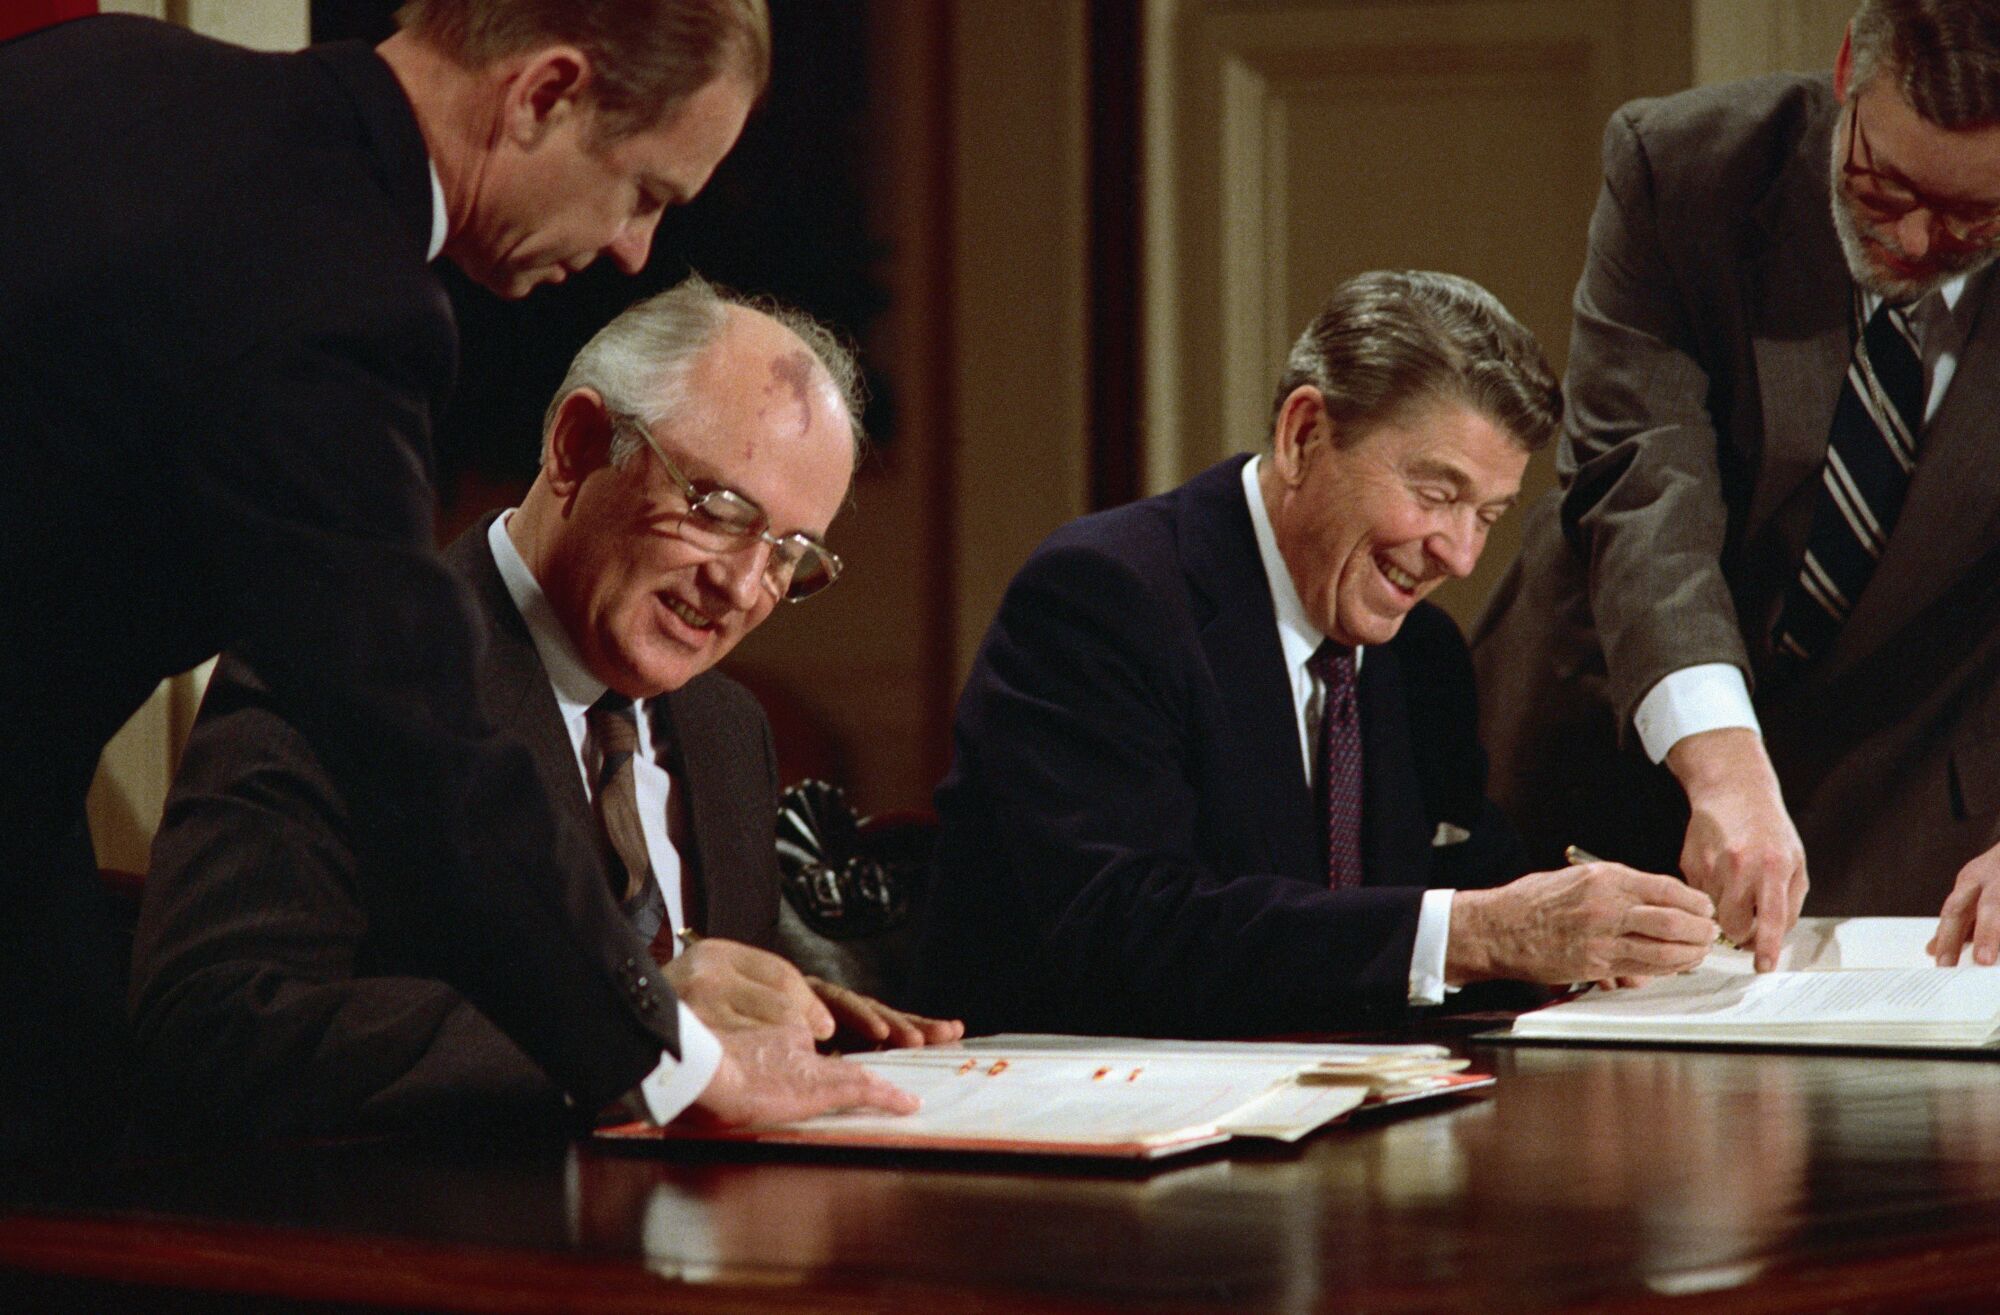 One man in suit and tie and glasses, left, and another man, also in suit and tie, smile as they prepare to sign documents 